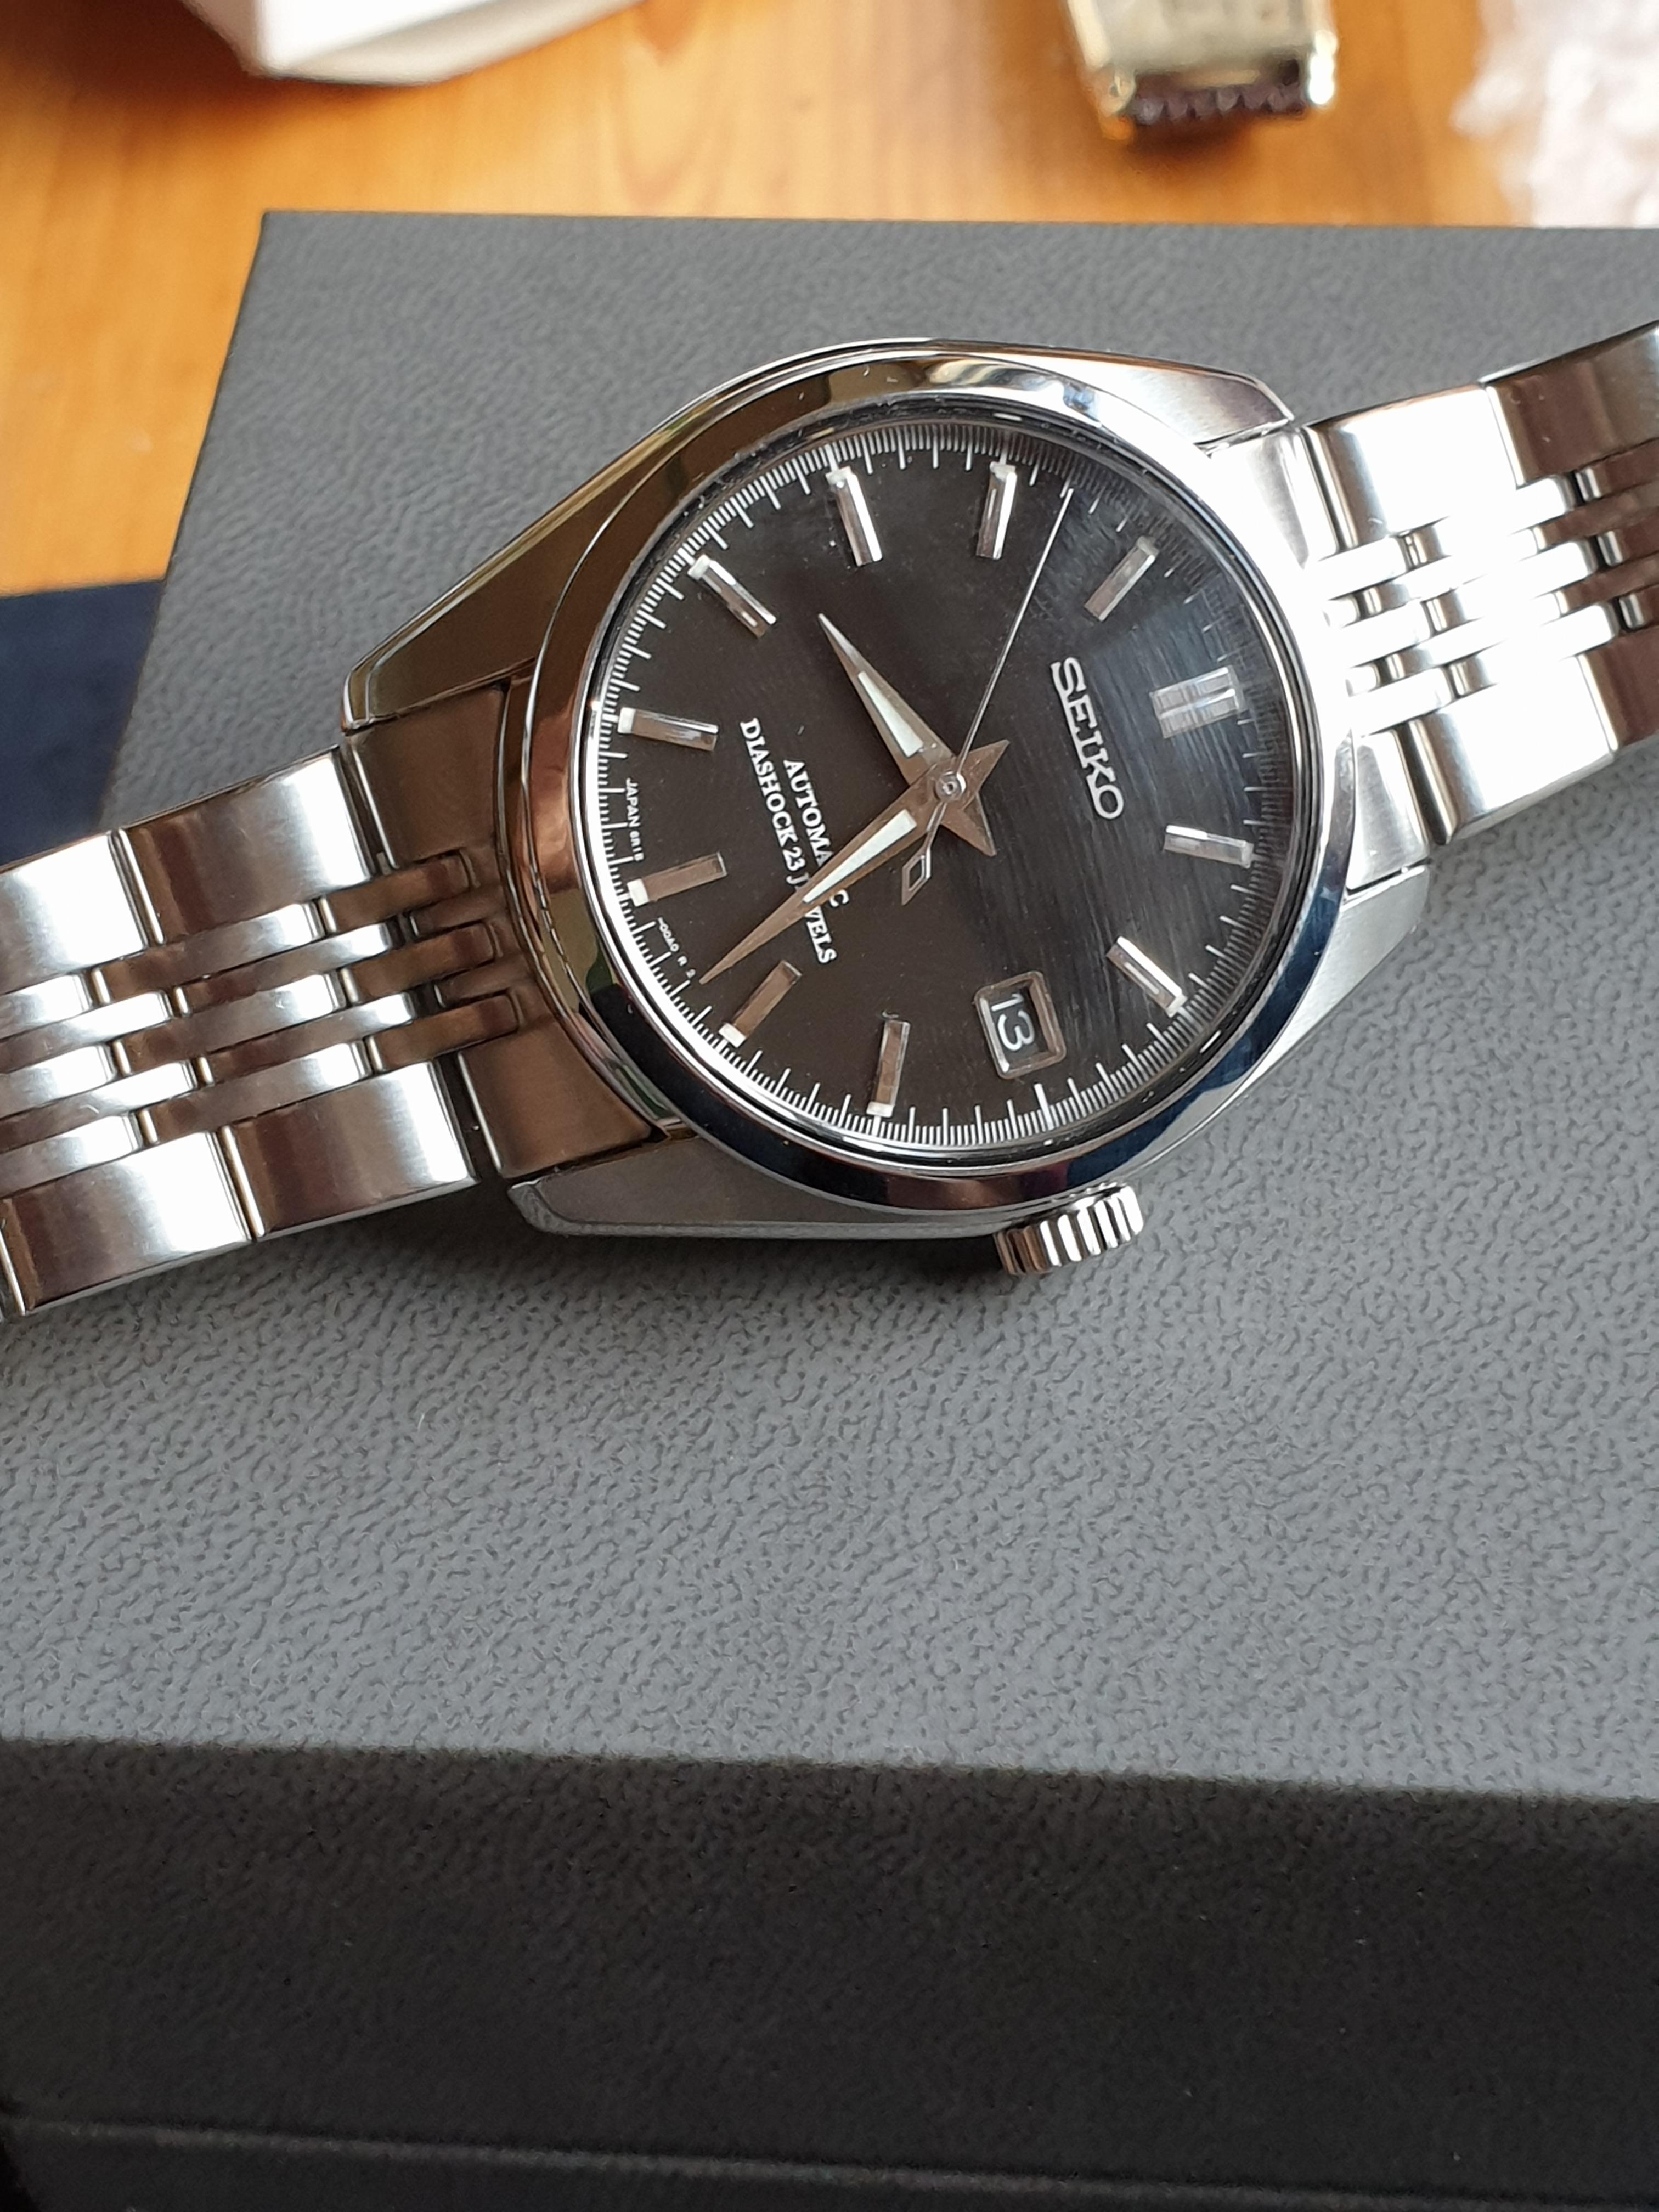 WTS] Seiko Spirit SCVS003 6R15 Movement Automatic SARB033 Predecessor -  Discontinued £315 shipped | WatchCharts